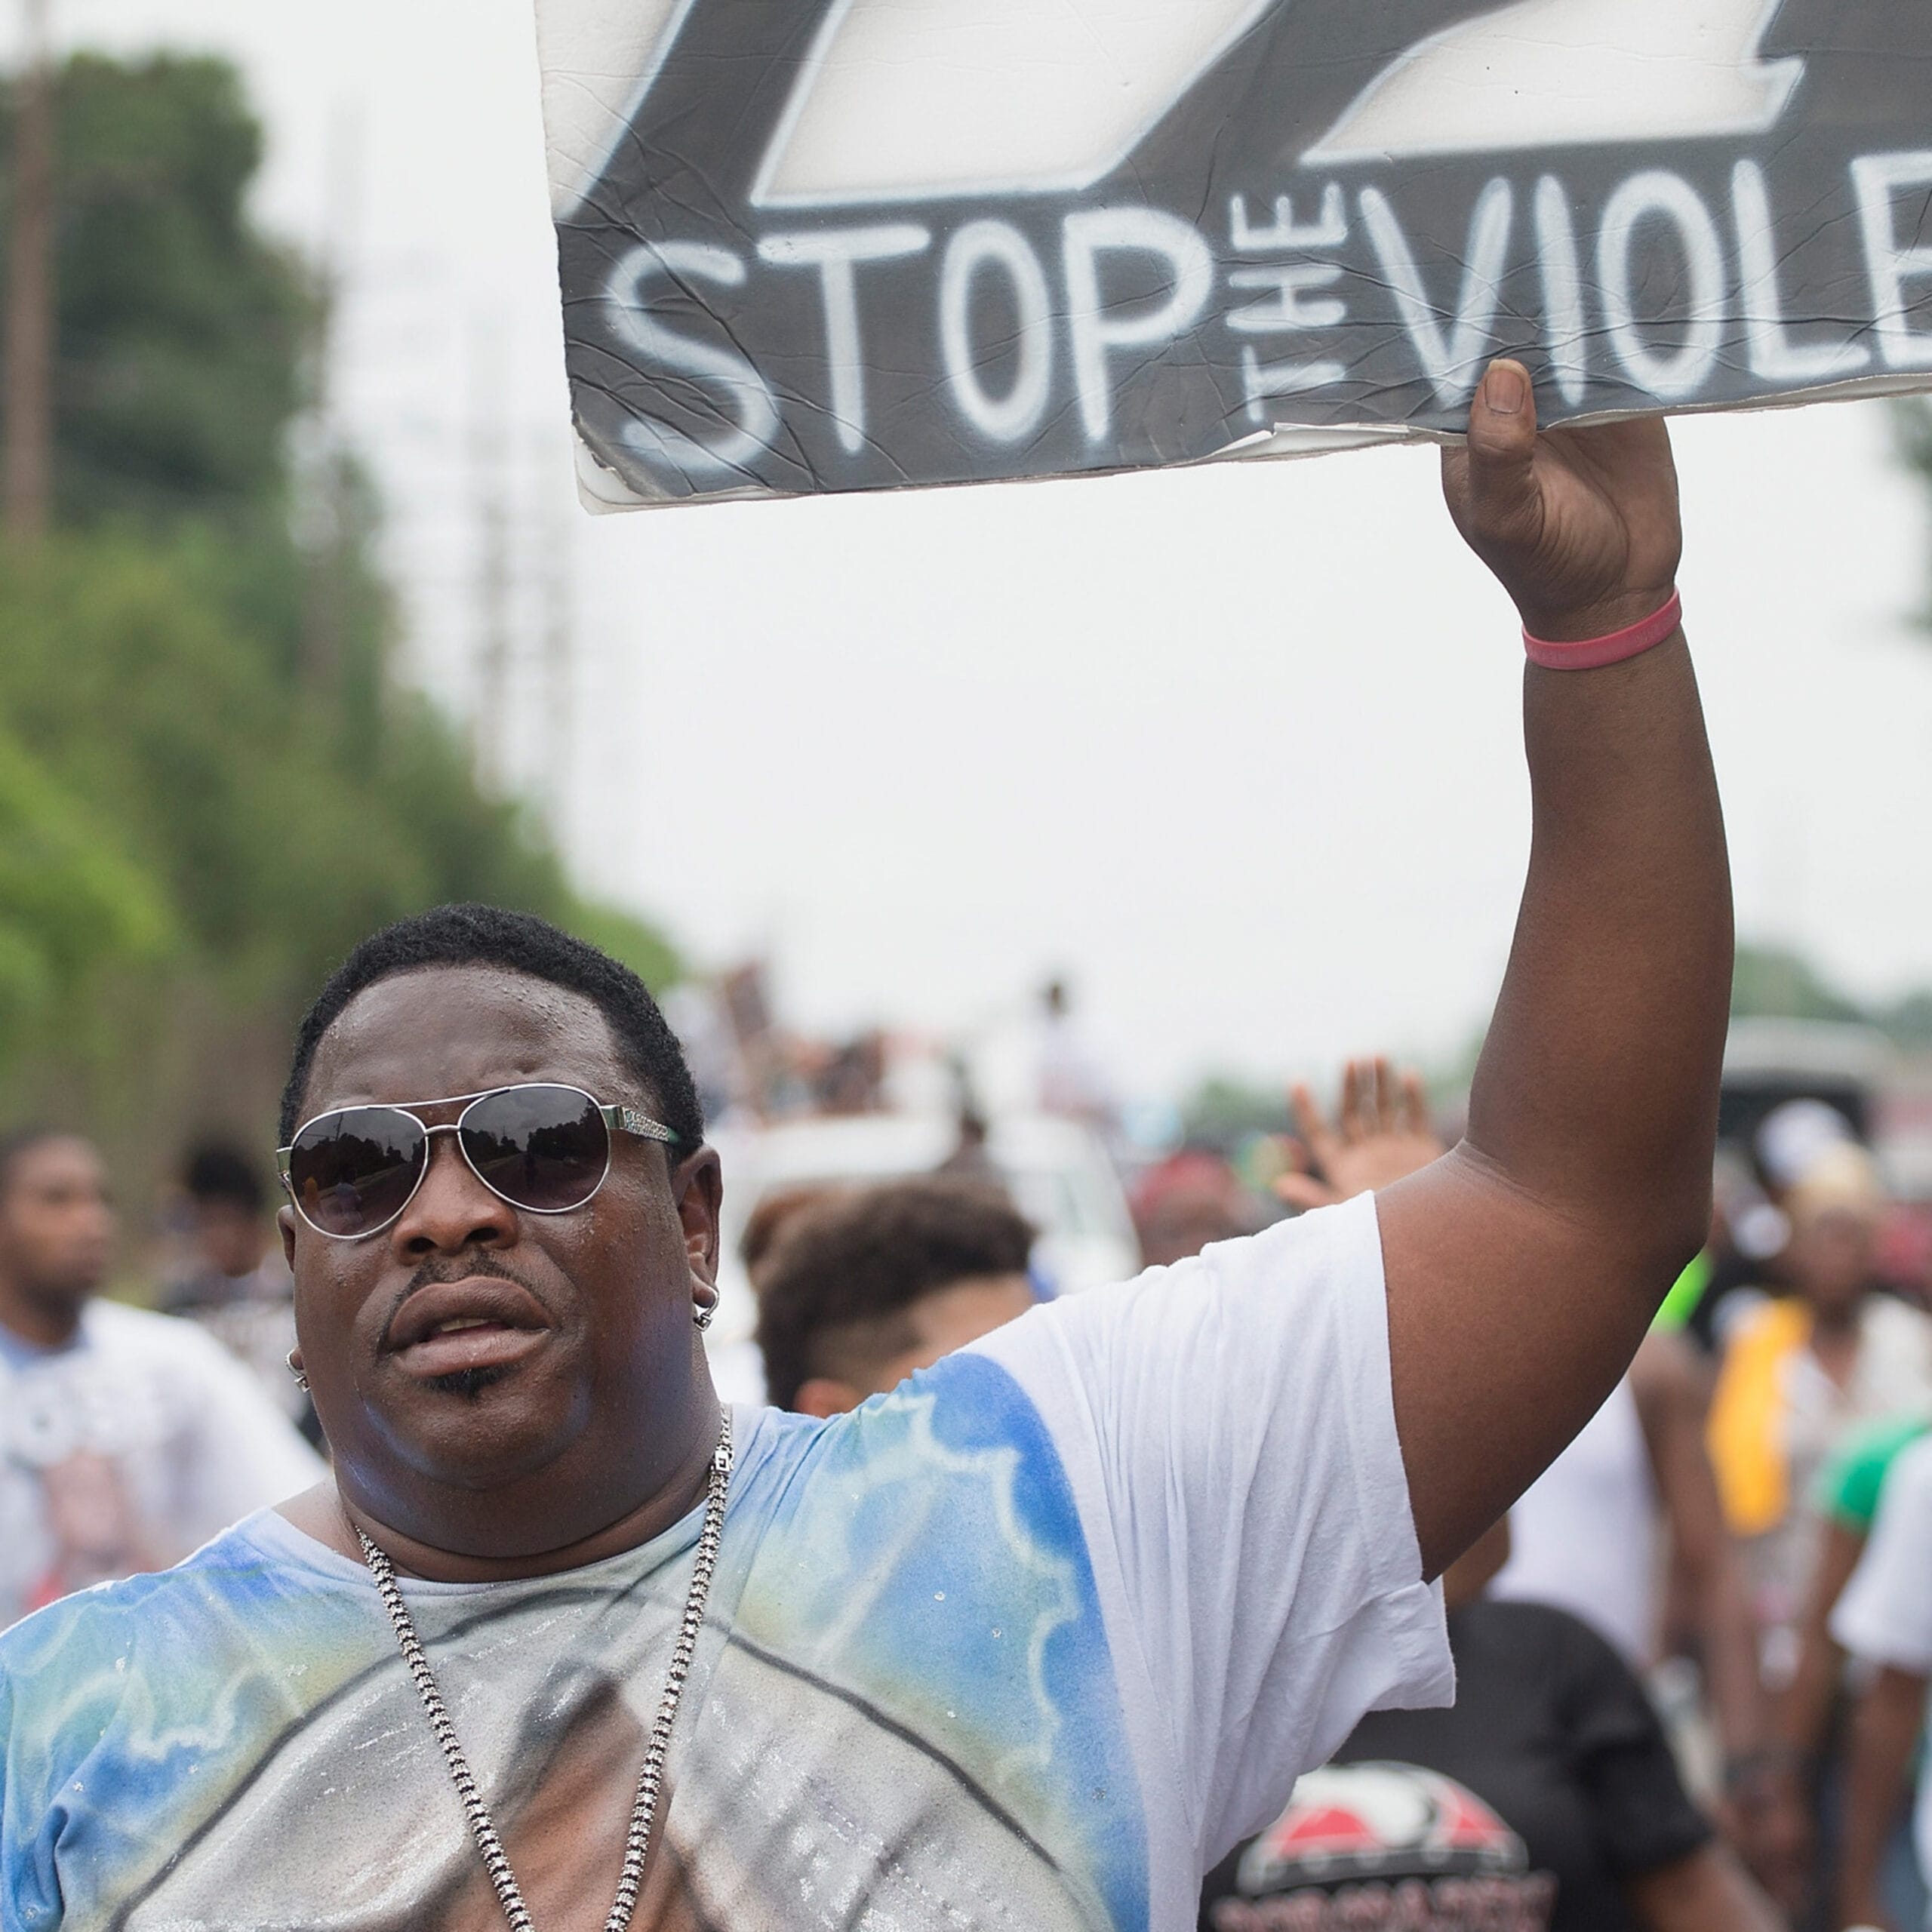 Addressing Community Violence in the City of St. Louis